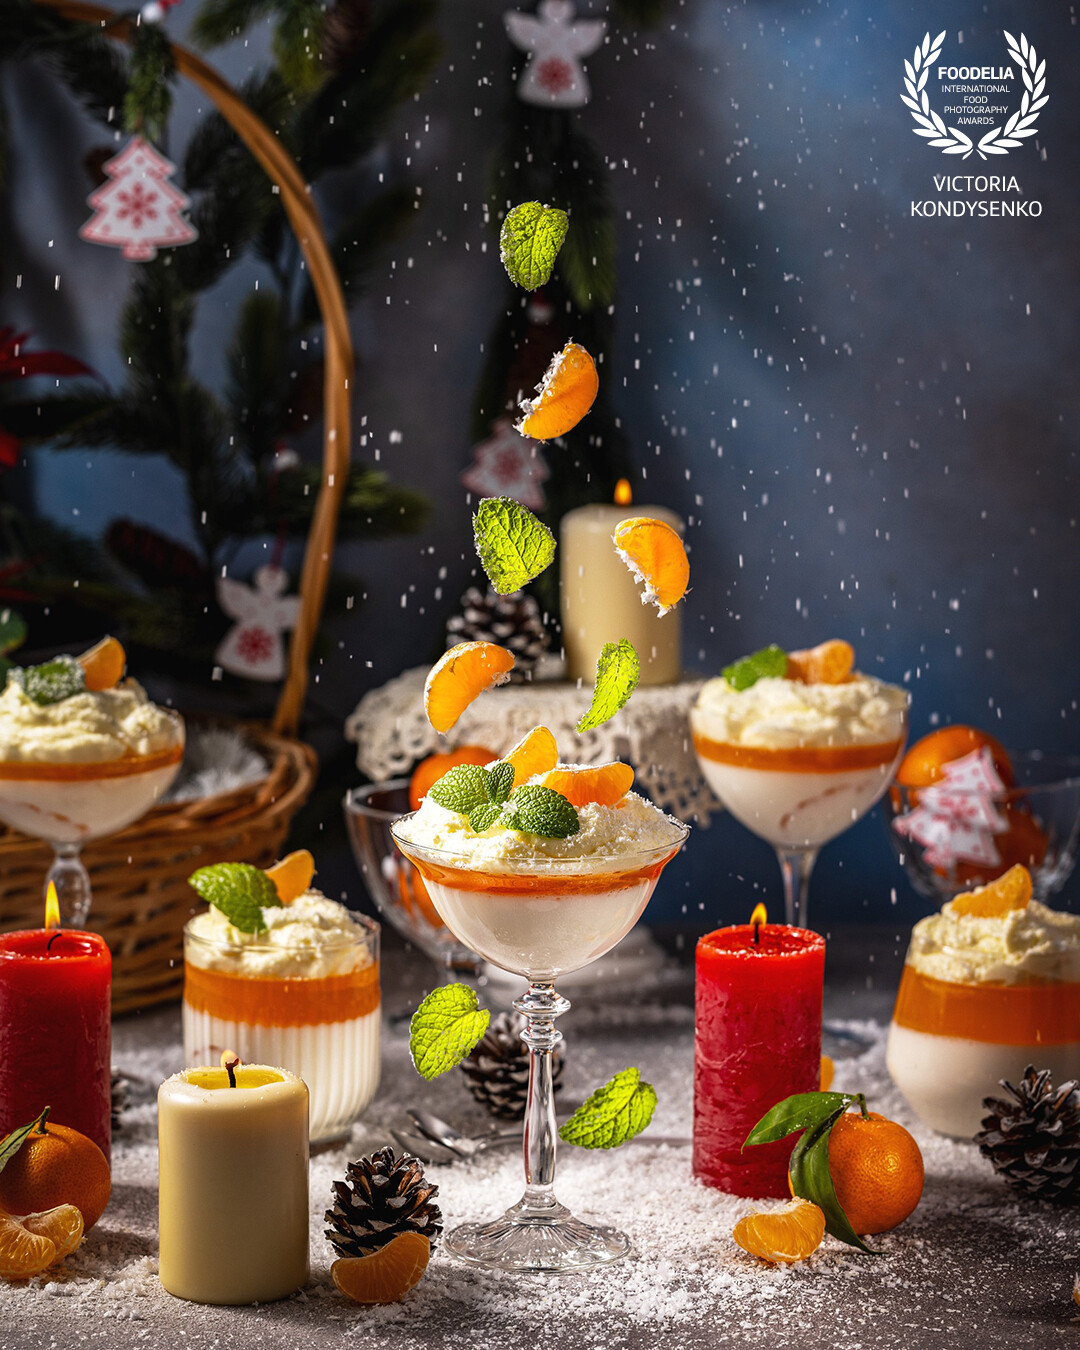 Christmas creamy dessert with tangerines. Promotional photo shoot of the local Ukrainian family cafe.